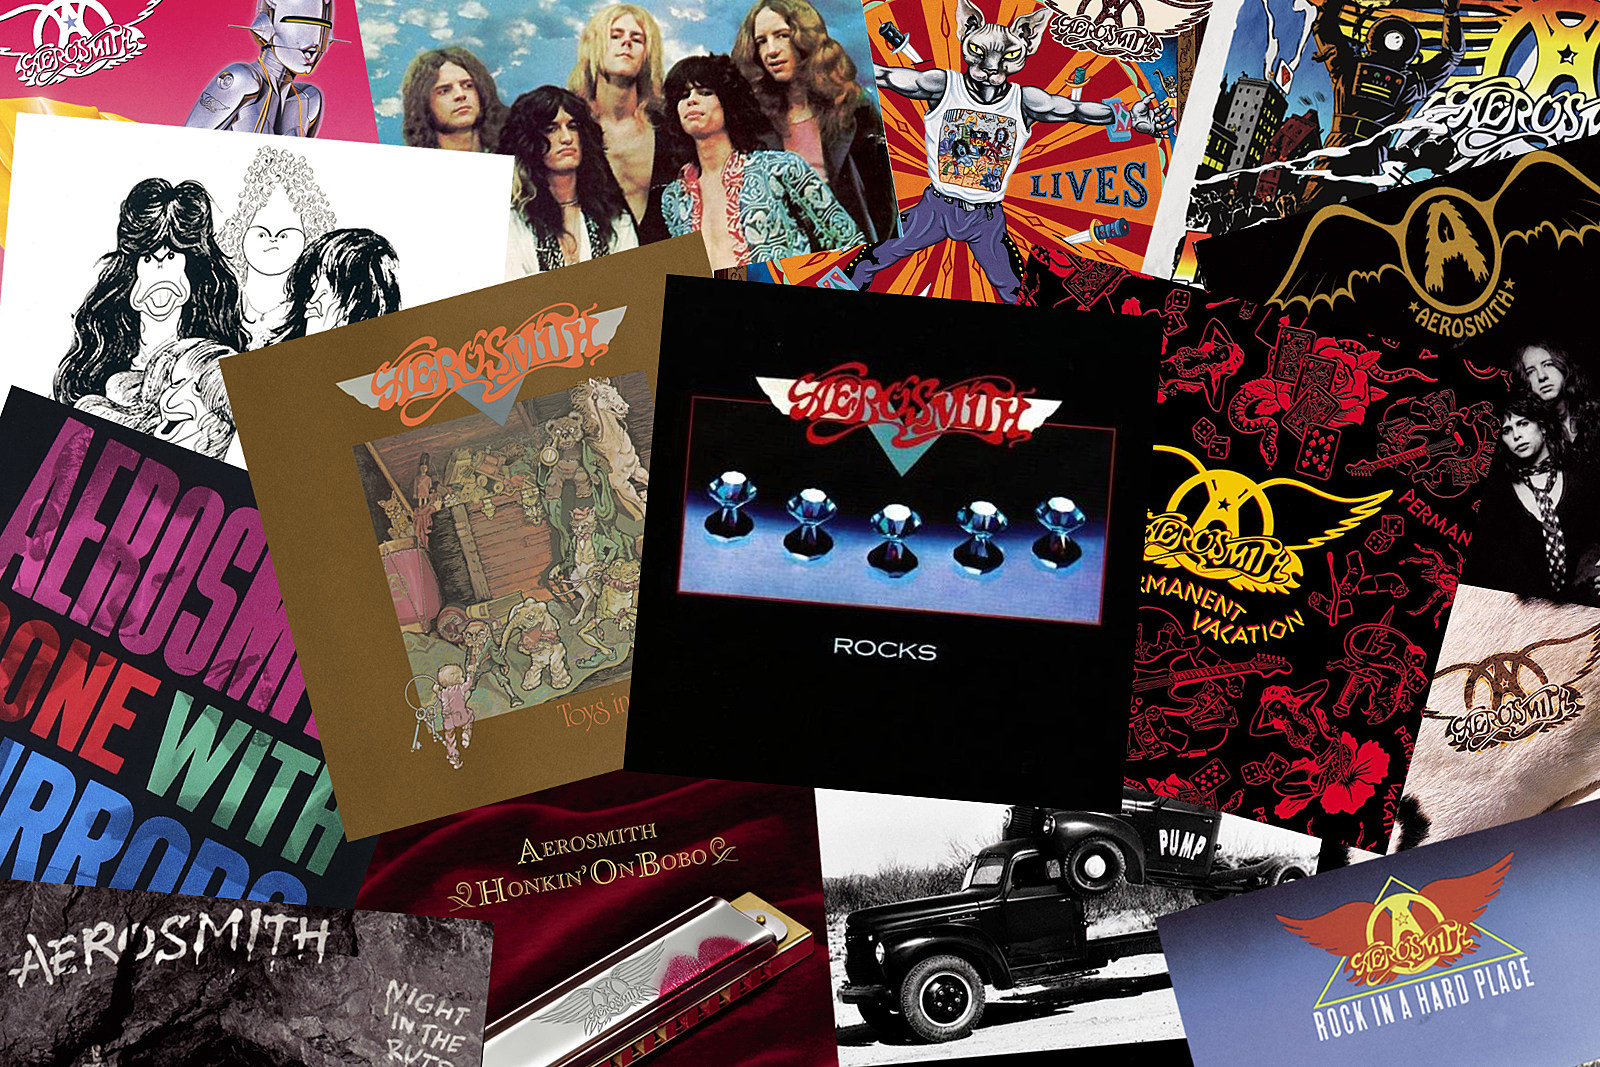 Underrated Aerosmith: The Most Overlooked Song From Each Album